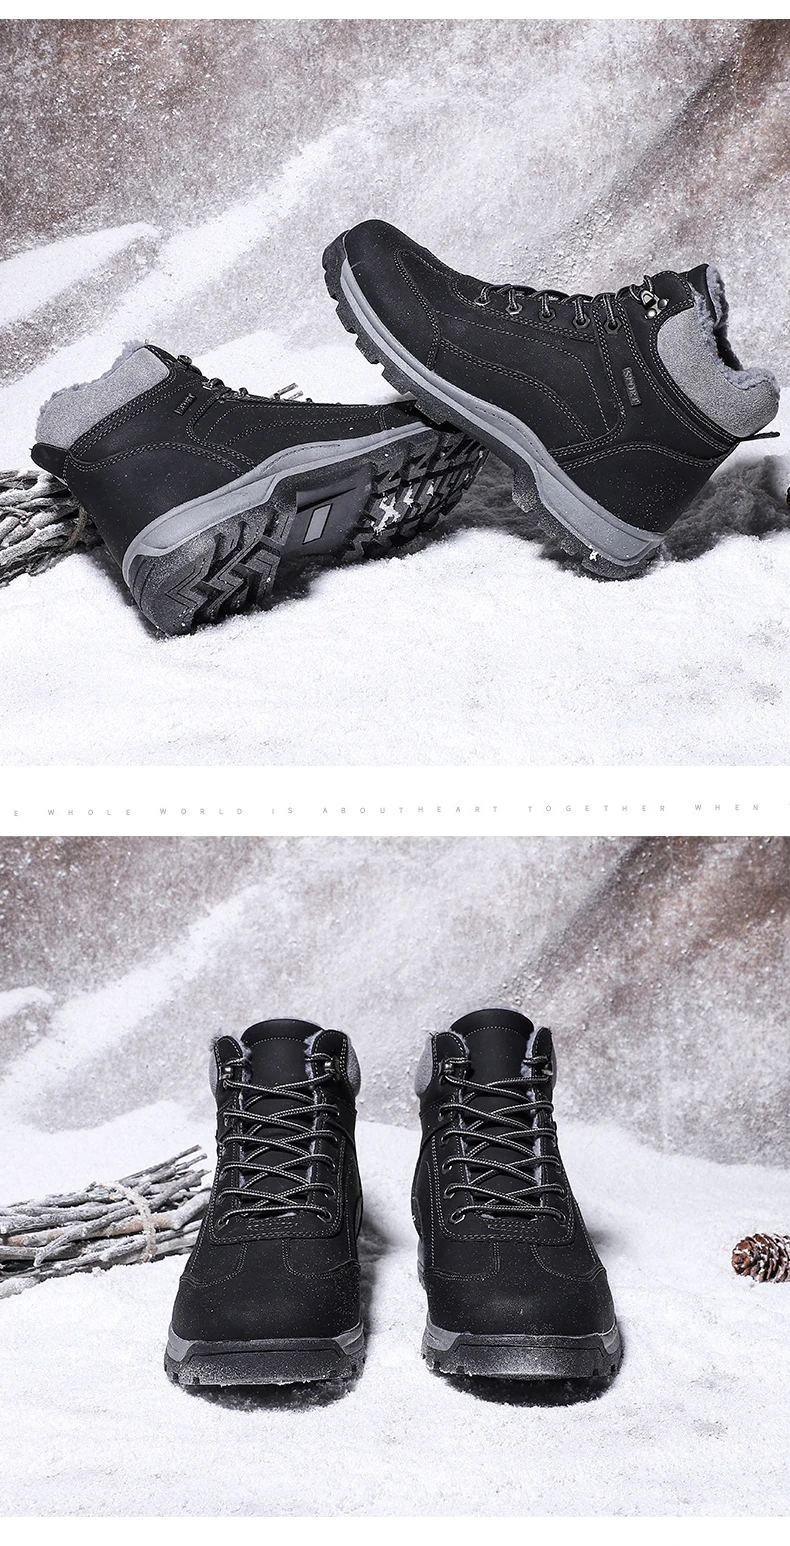 Genuine Leather Men Boots Winter with Fur Waterproof Warm Snow Boots Men Winter Work Casual Shoes Military Ankle Boots JKPUDUN